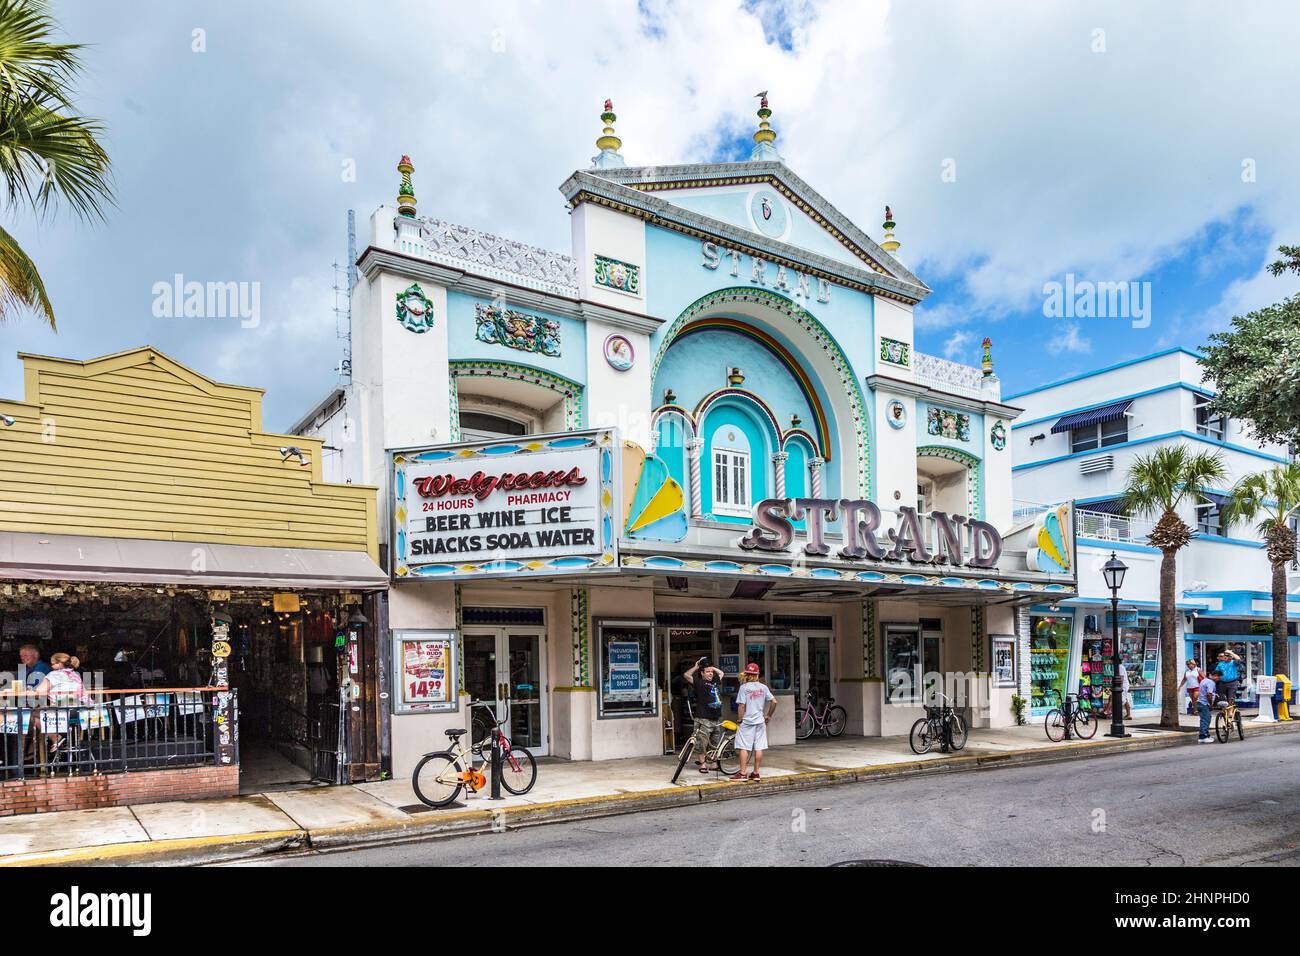 people at cinema theater Strand in Key West Stock Photo